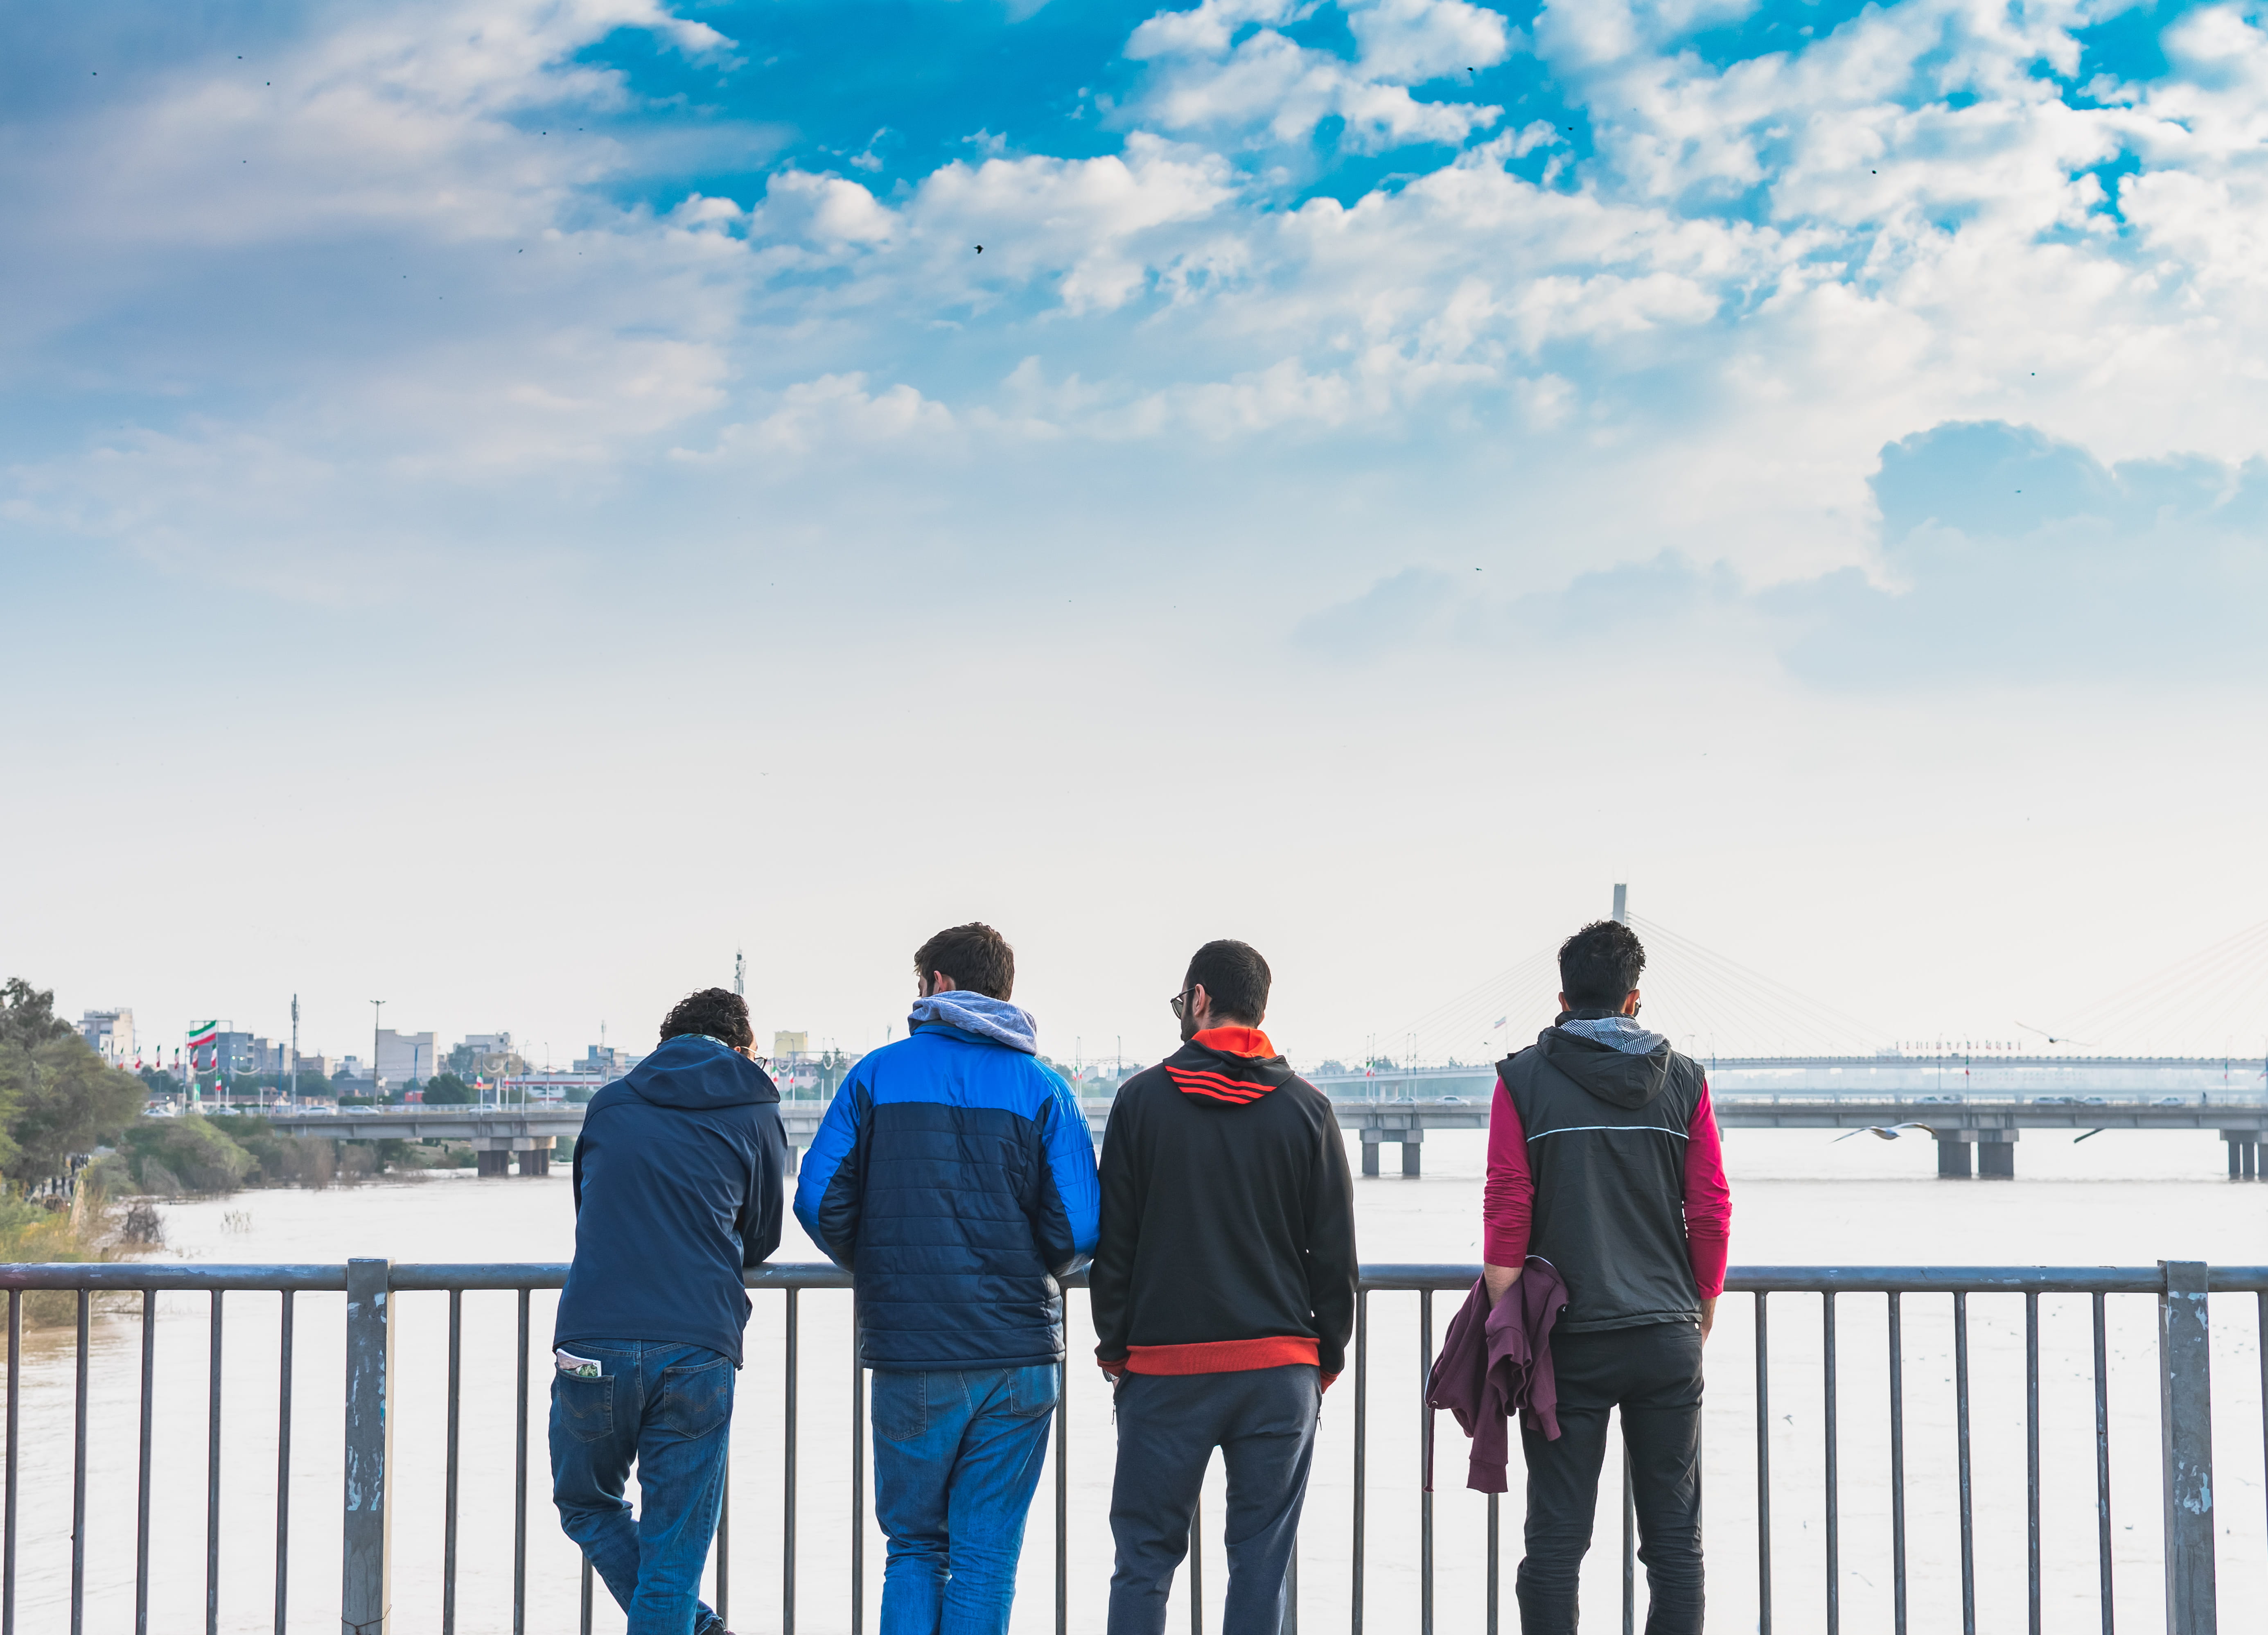 four man standing front on fence, human, person, railing, apparel